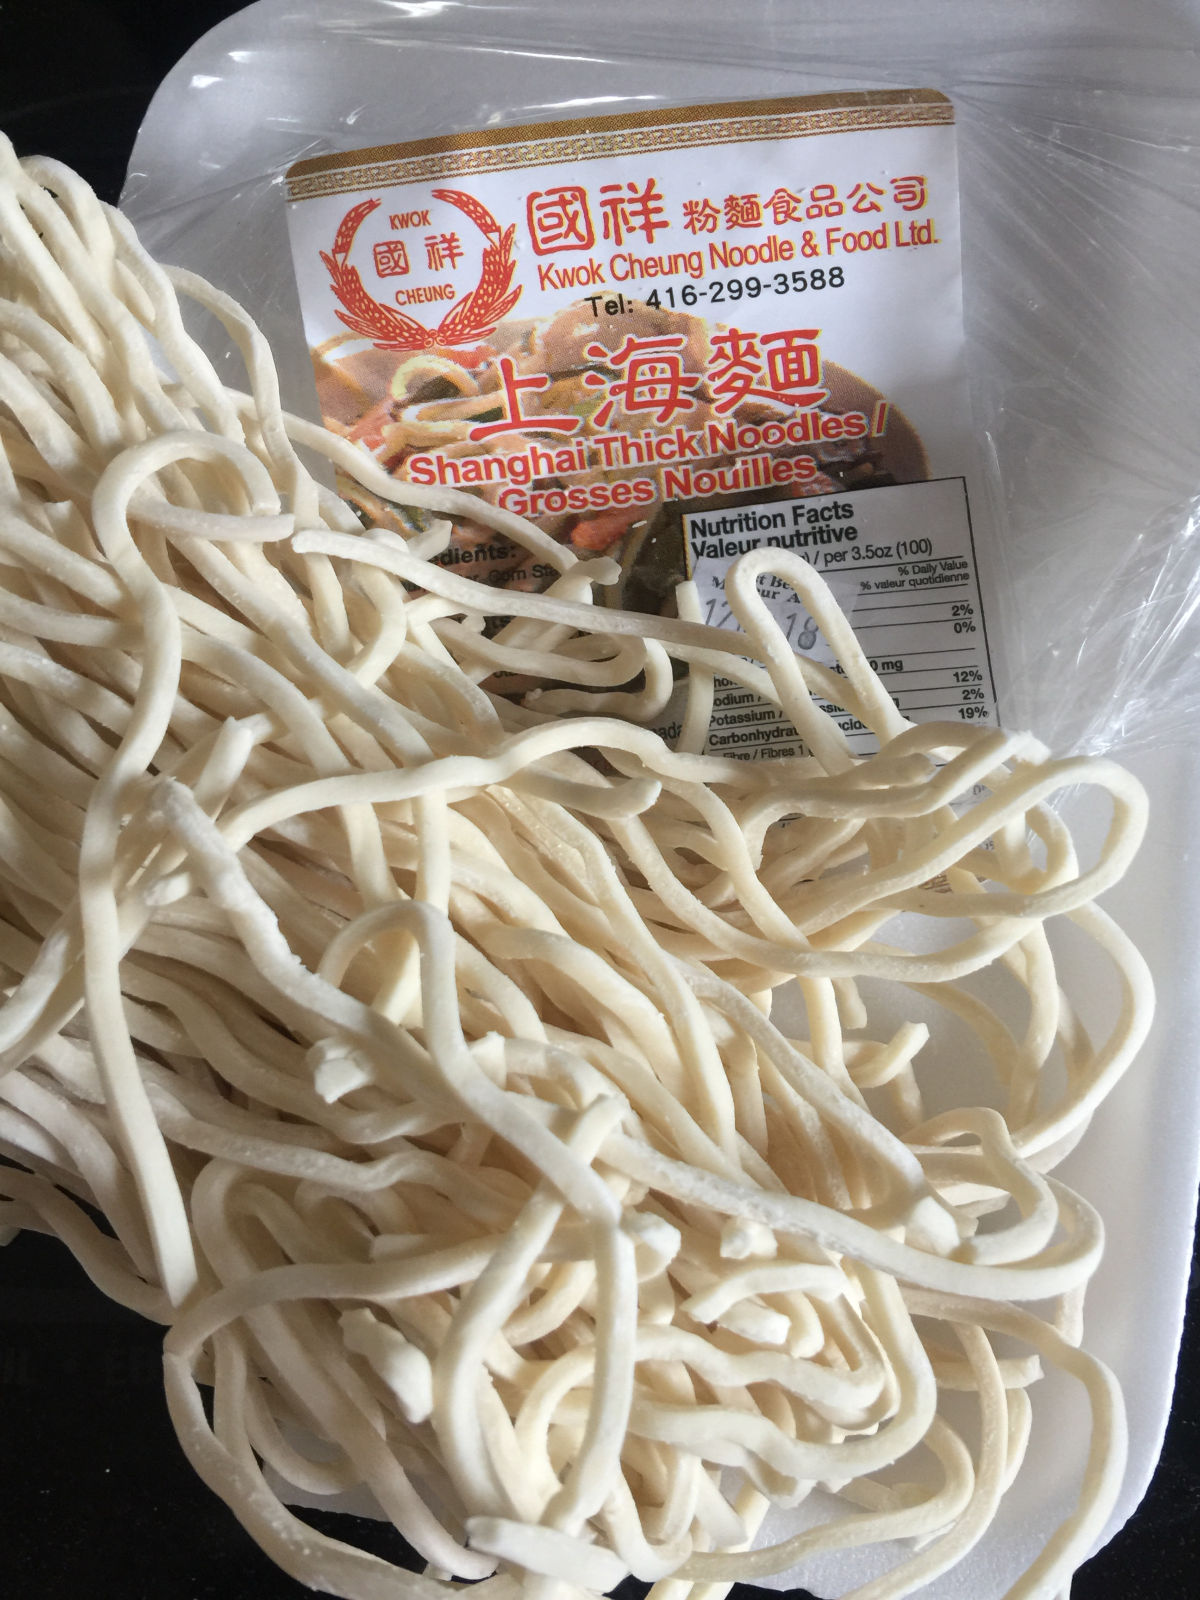 A package of Shanghai thick noodles.